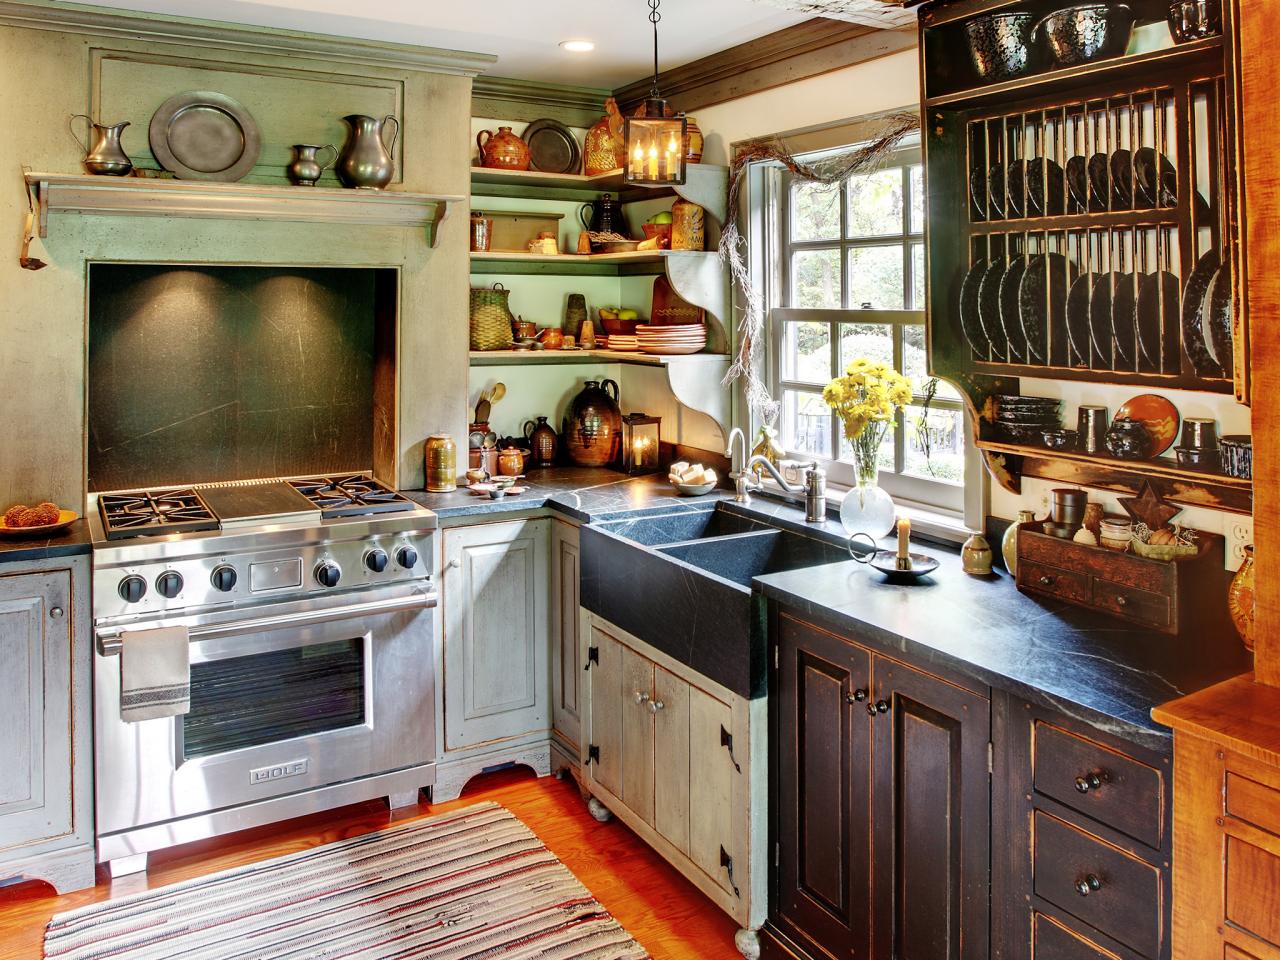 Recycled Kitchen Cabinets Pictures, Ideas & Tips From HGTV   HGTV